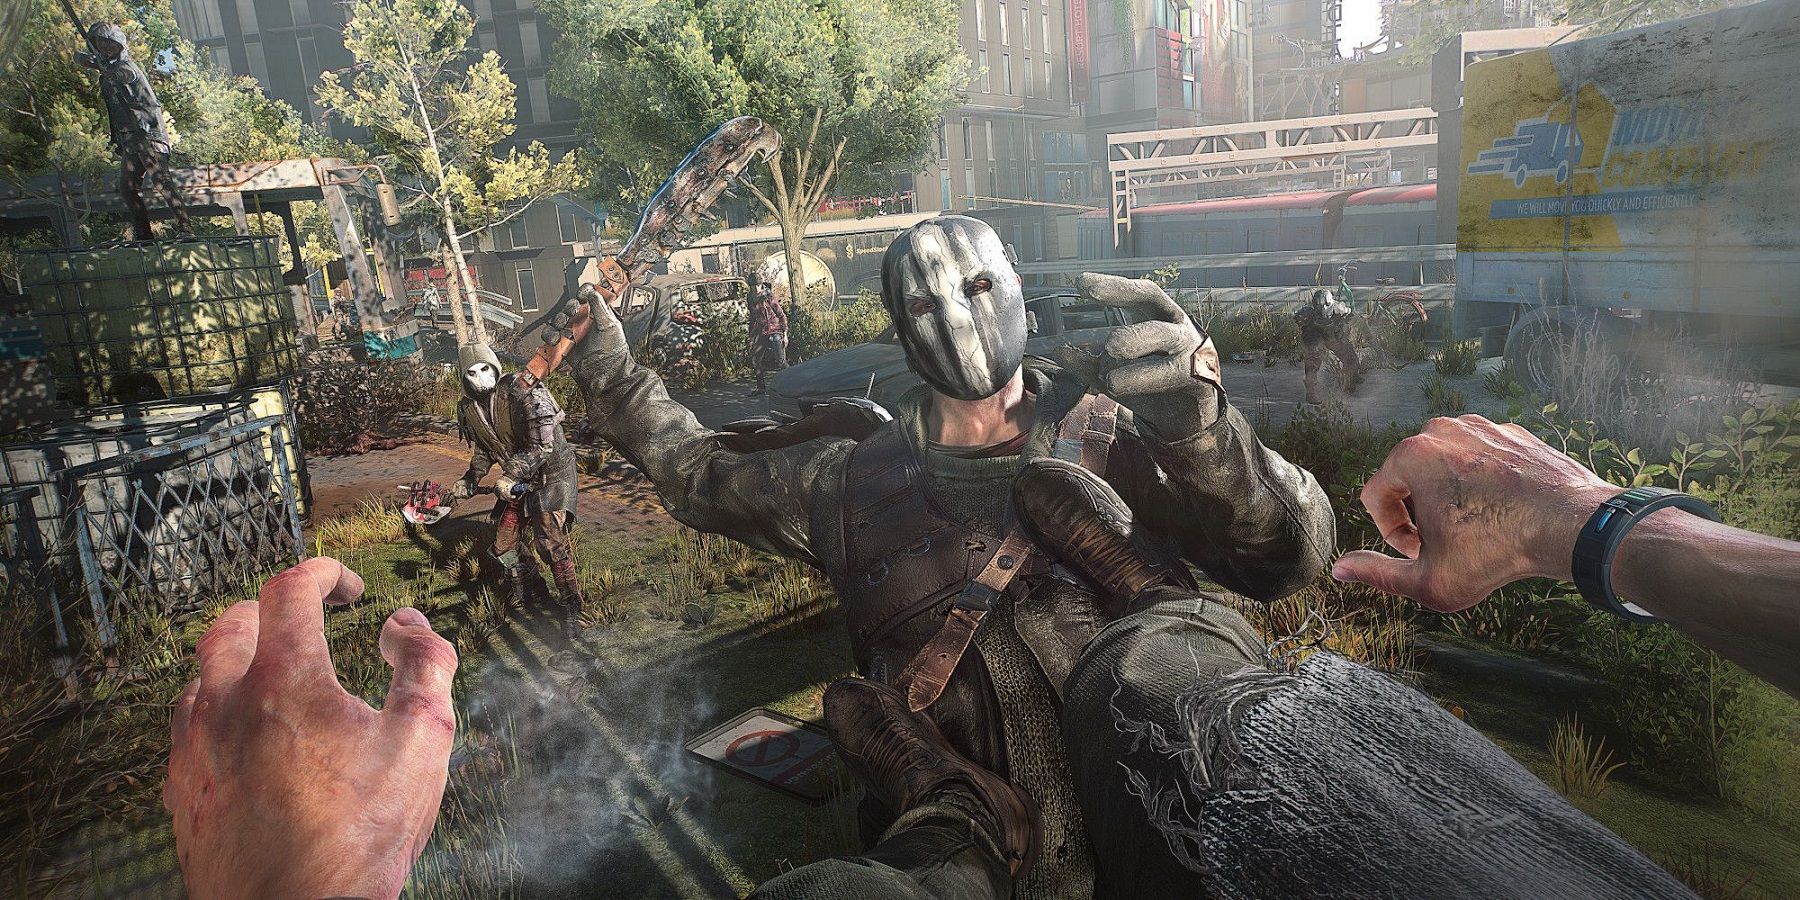 Screenshot from Dying Light 2 showing the player kicking an enemy.